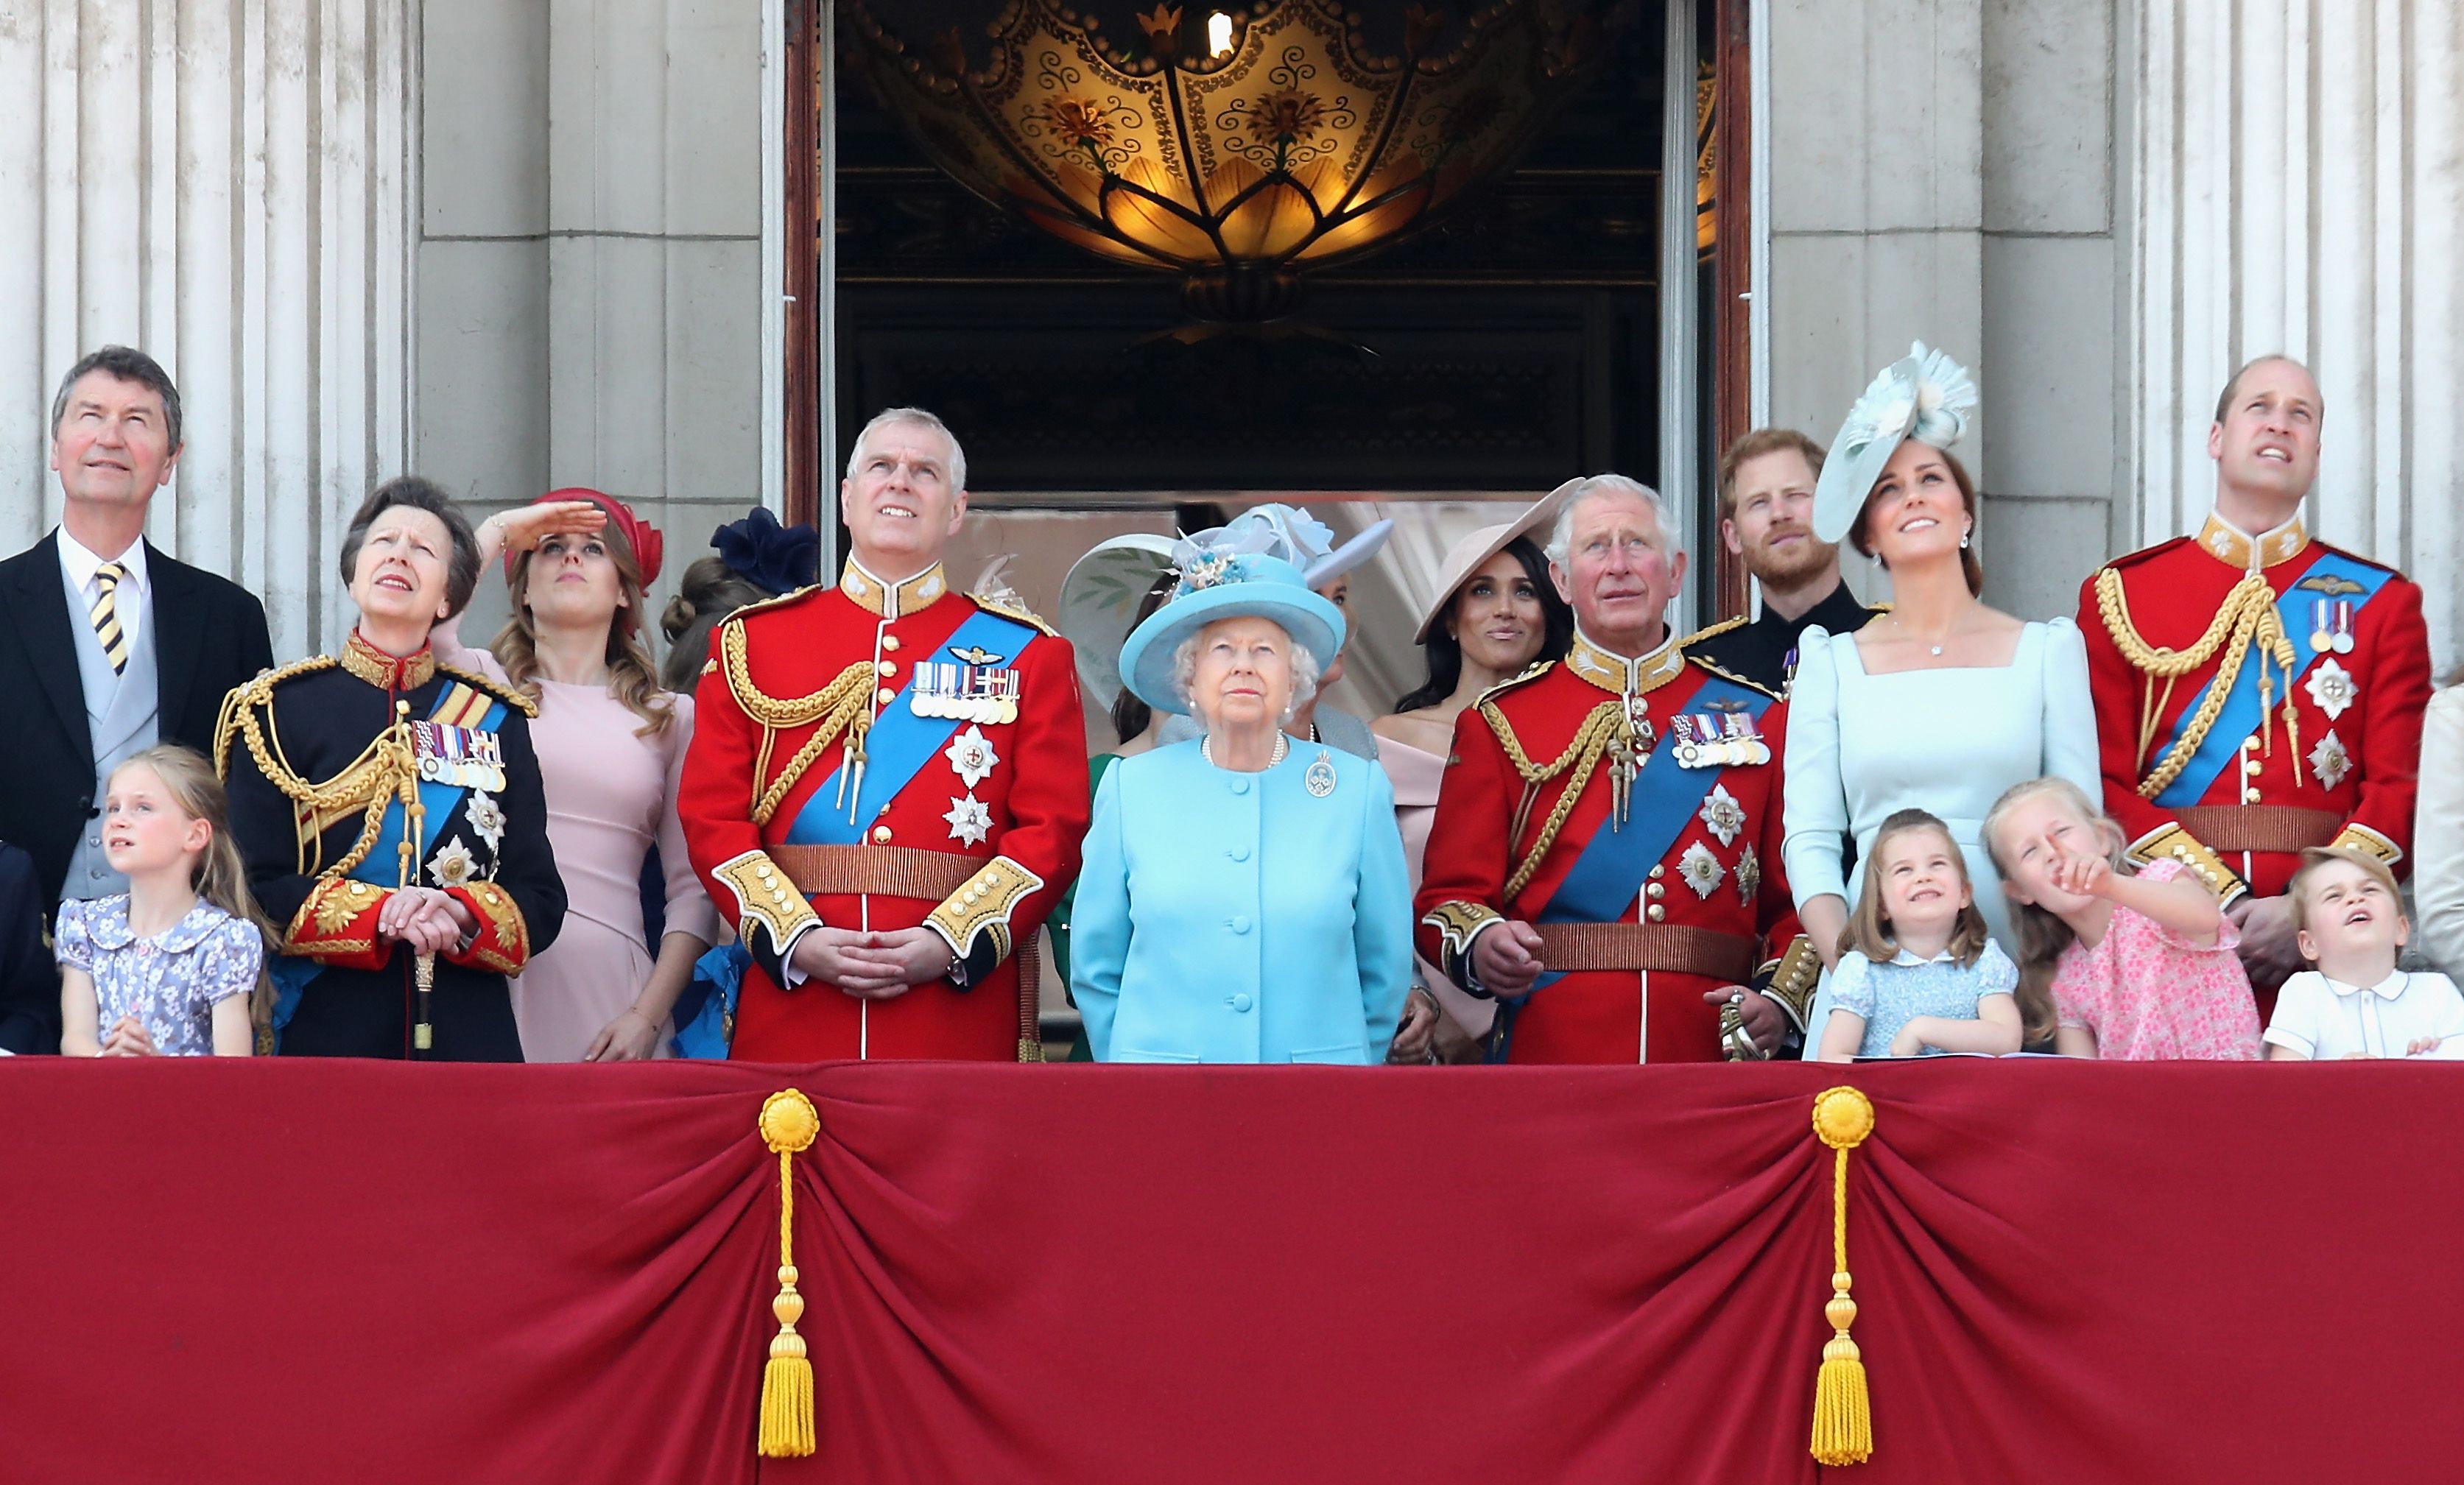 The Royal Family watches the flypast during Trooping The Colour event on June 9, 2018, in London, England. | Source: Getty Images